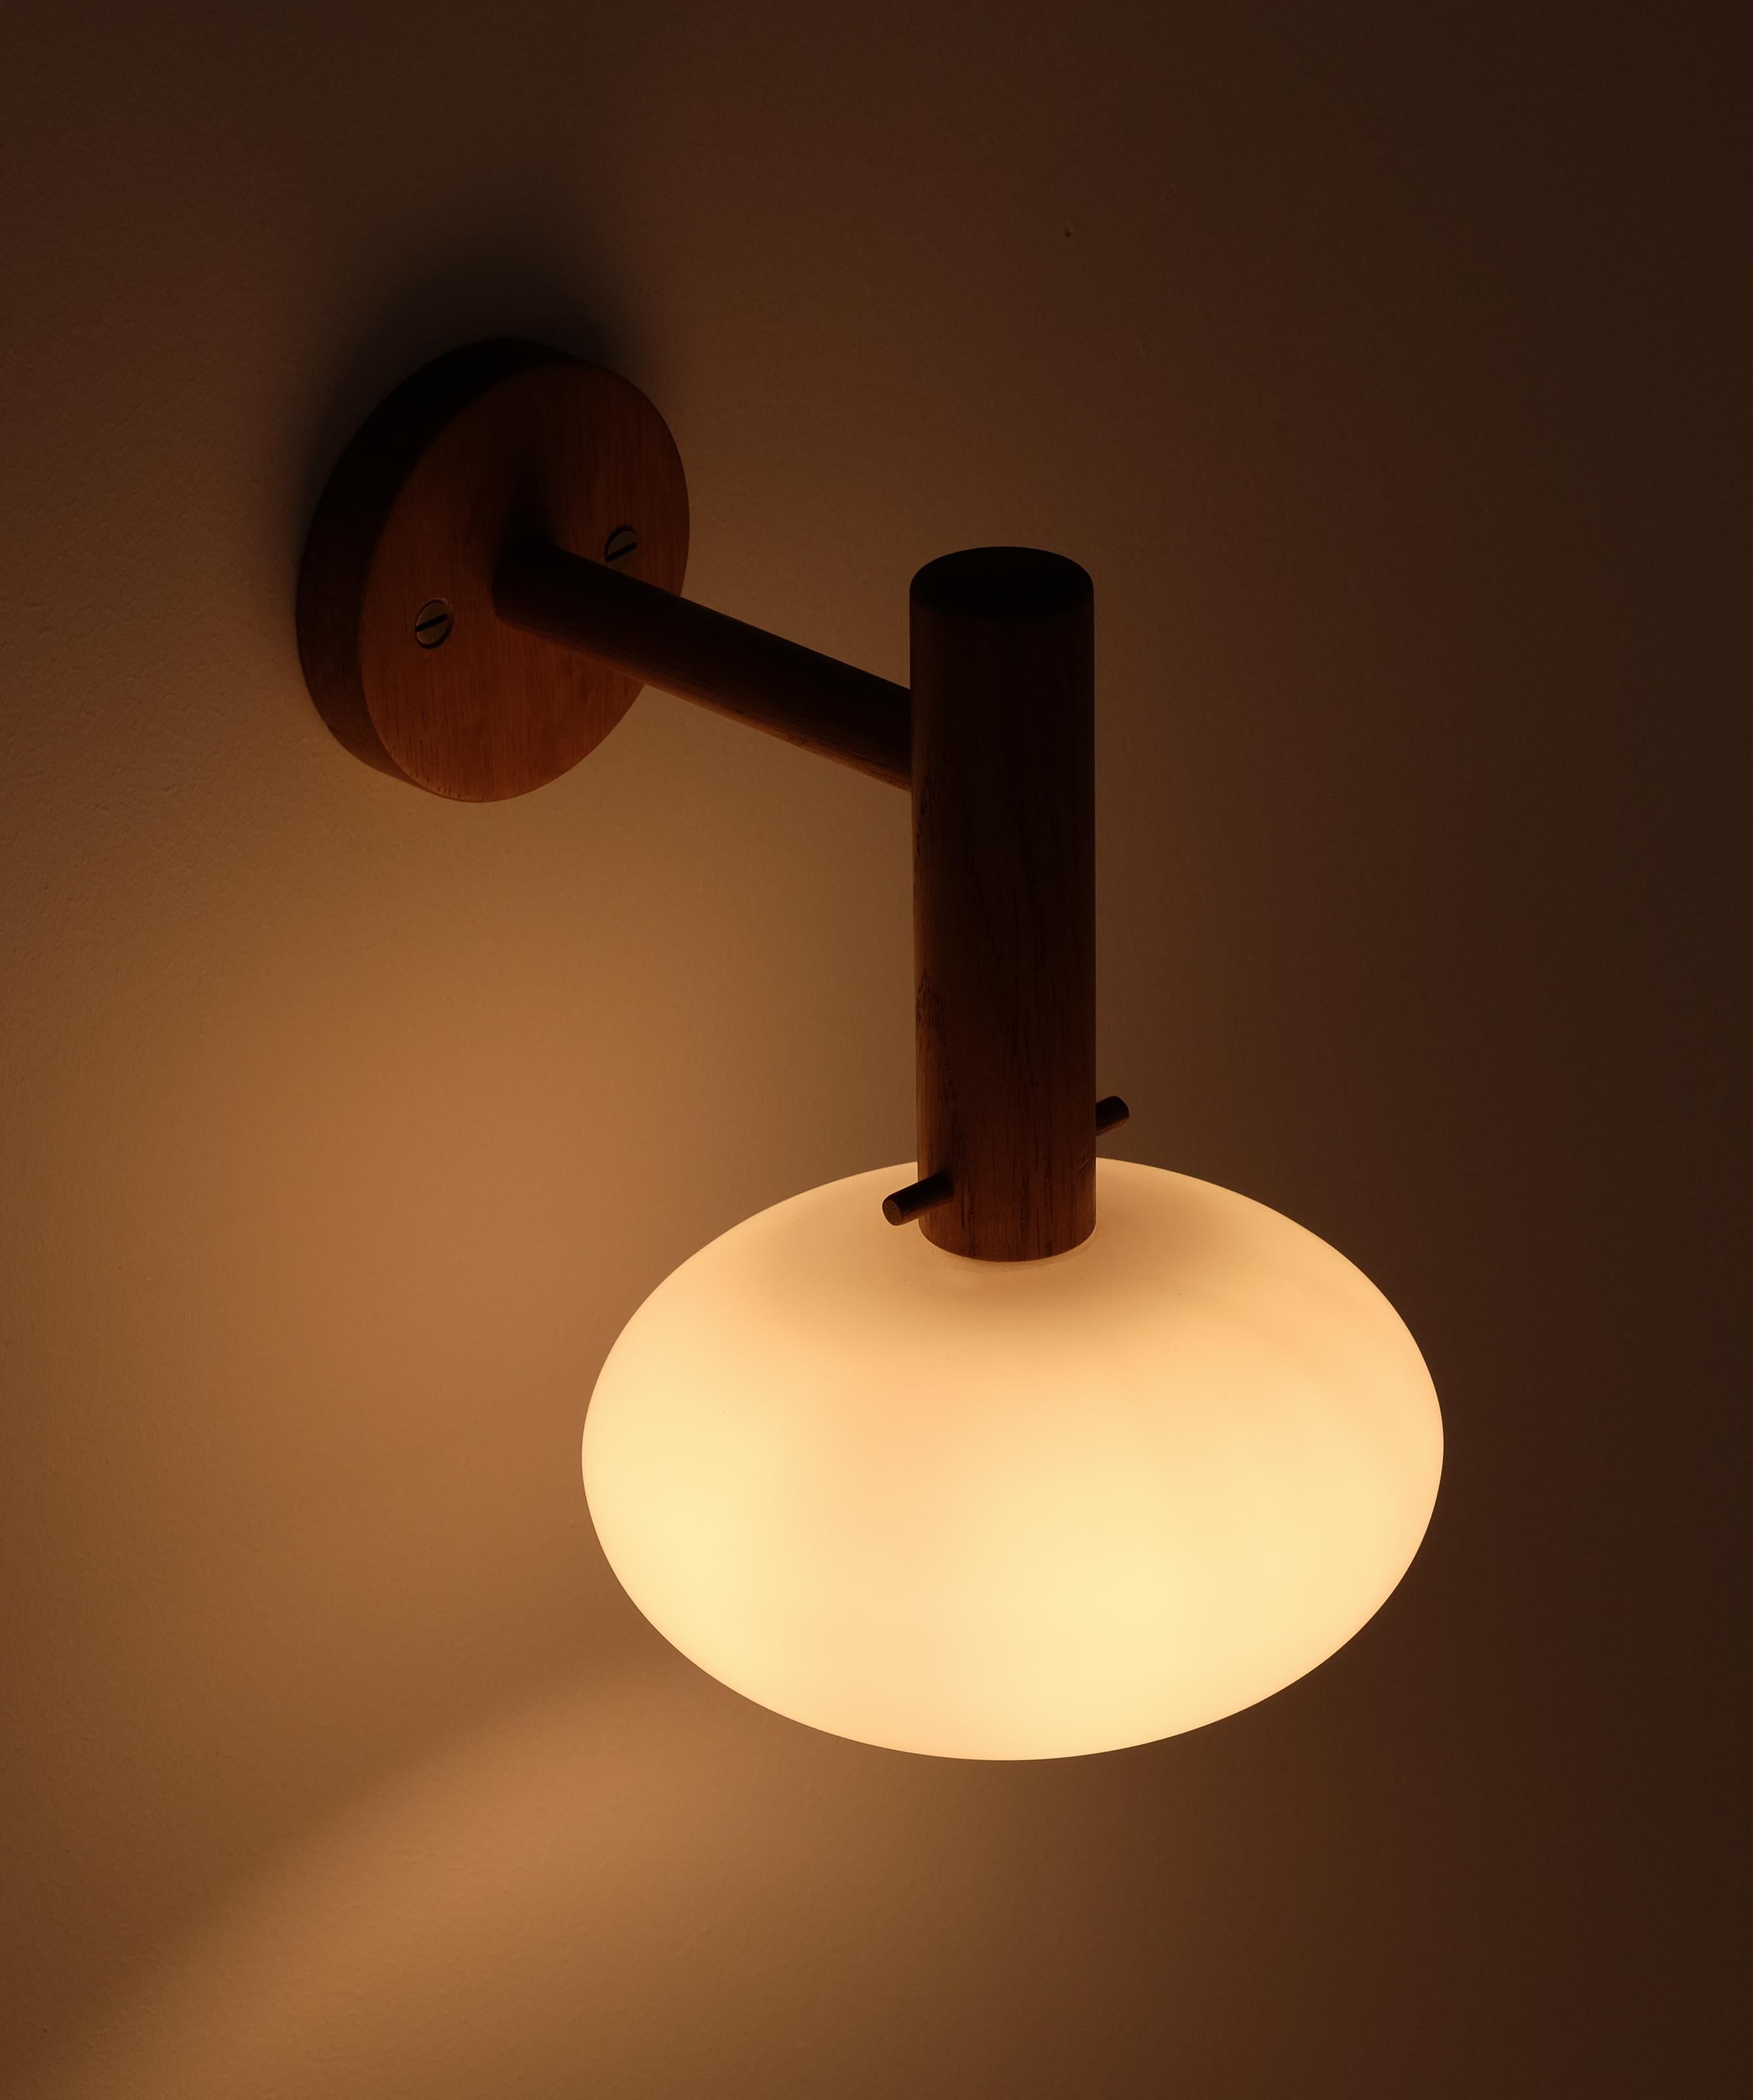 Pair of Wall Lamps by Uno & Östen Kristiansson for Luxus, 1960s For Sale 1